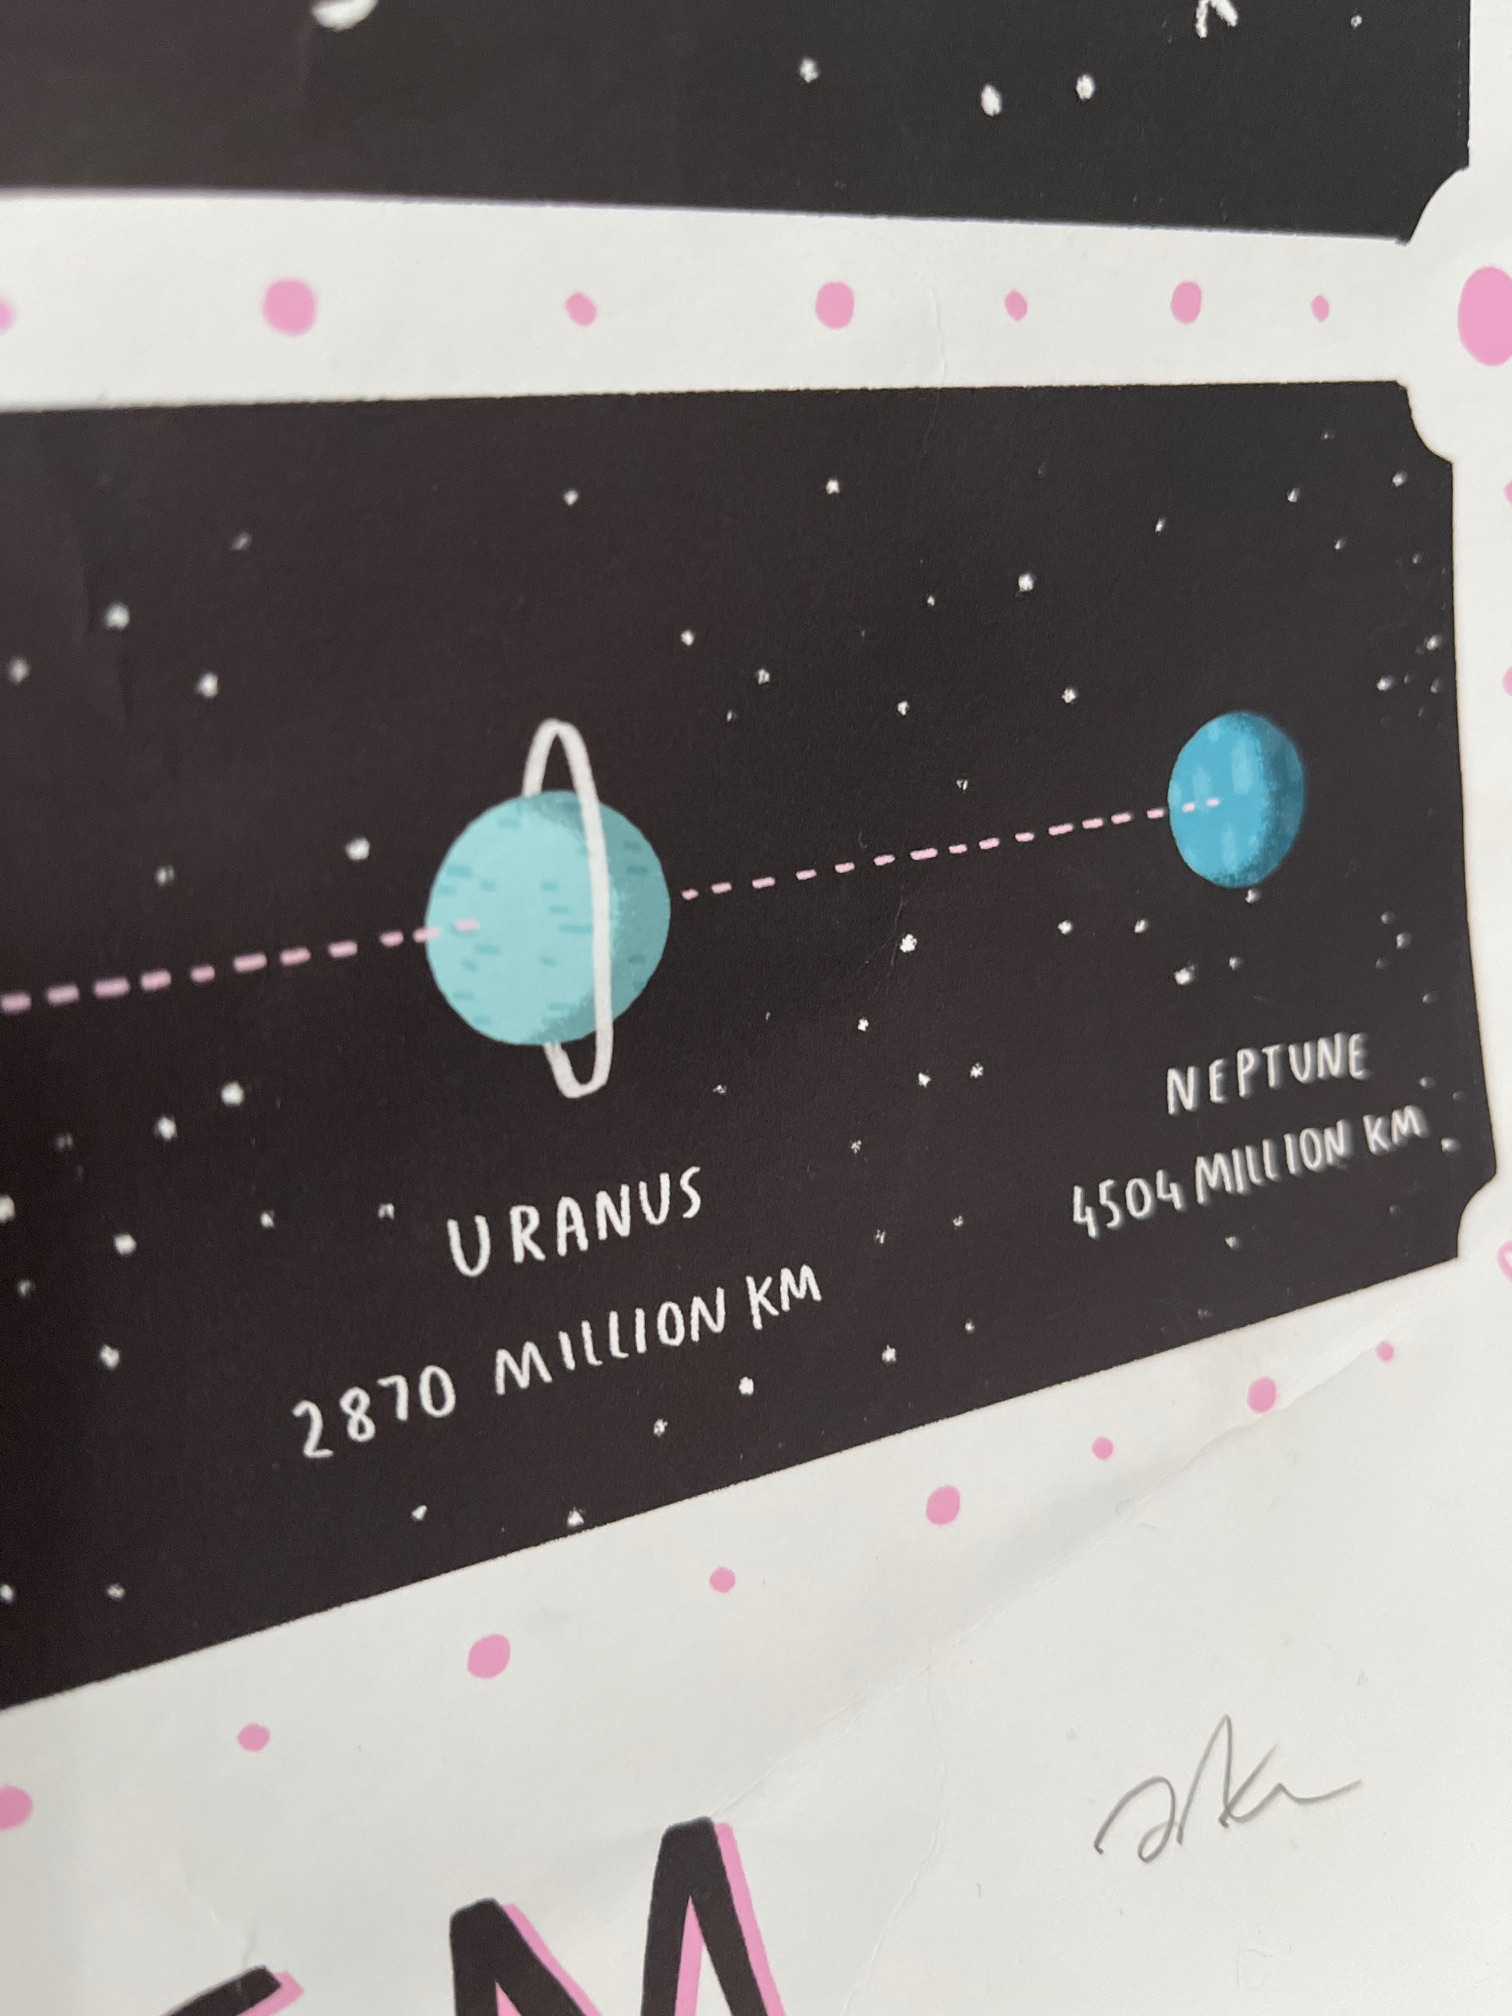 close up on a part of a solar system poster, showing the distances of uranus and neptune.